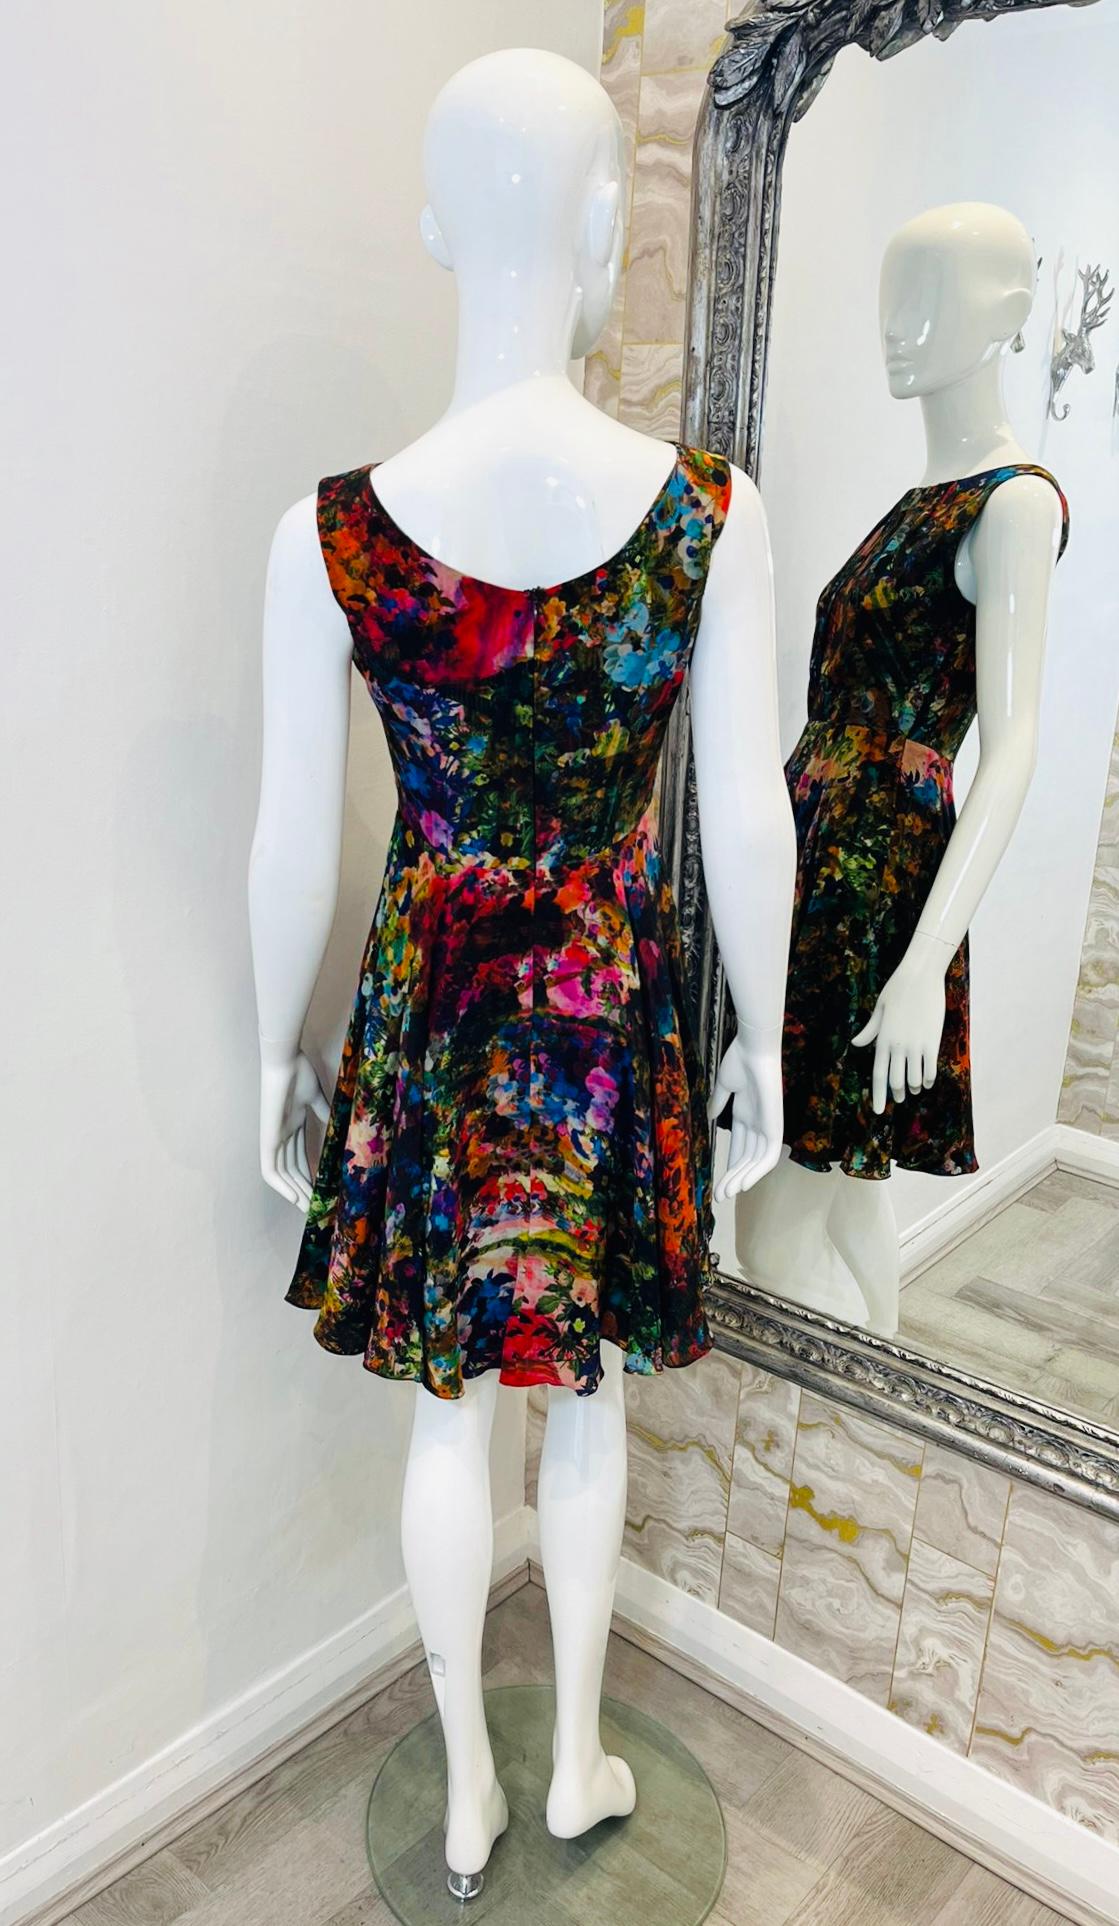 Erdem Fit & Flare Printed Silk Dress In Excellent Condition For Sale In London, GB